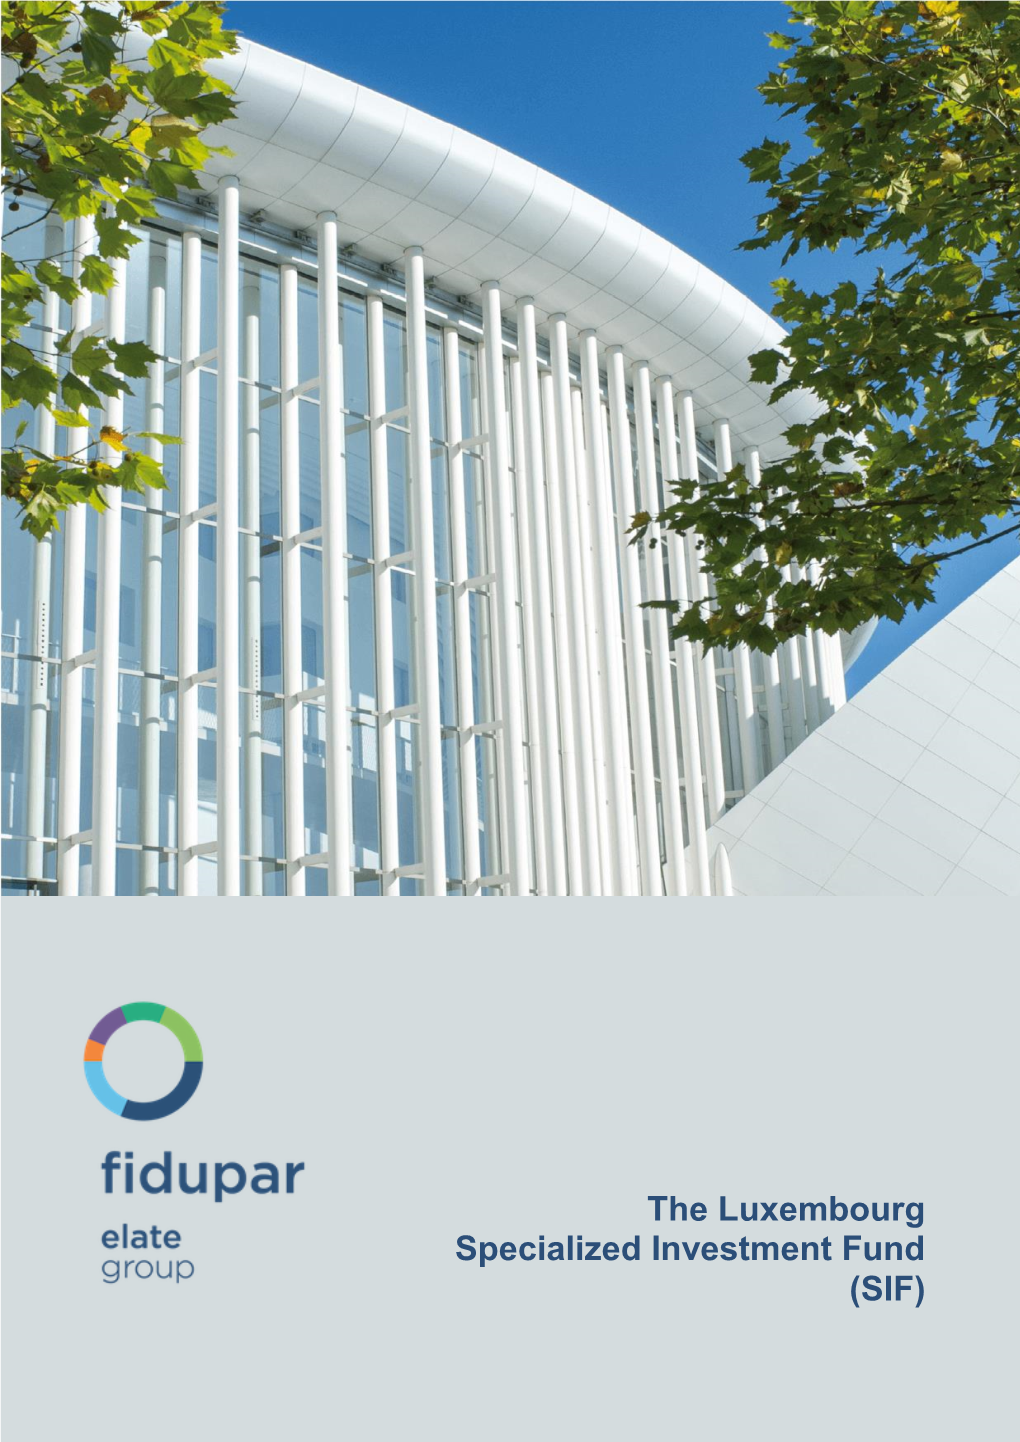 The Luxembourg Specialized Investment Fund (SIF)